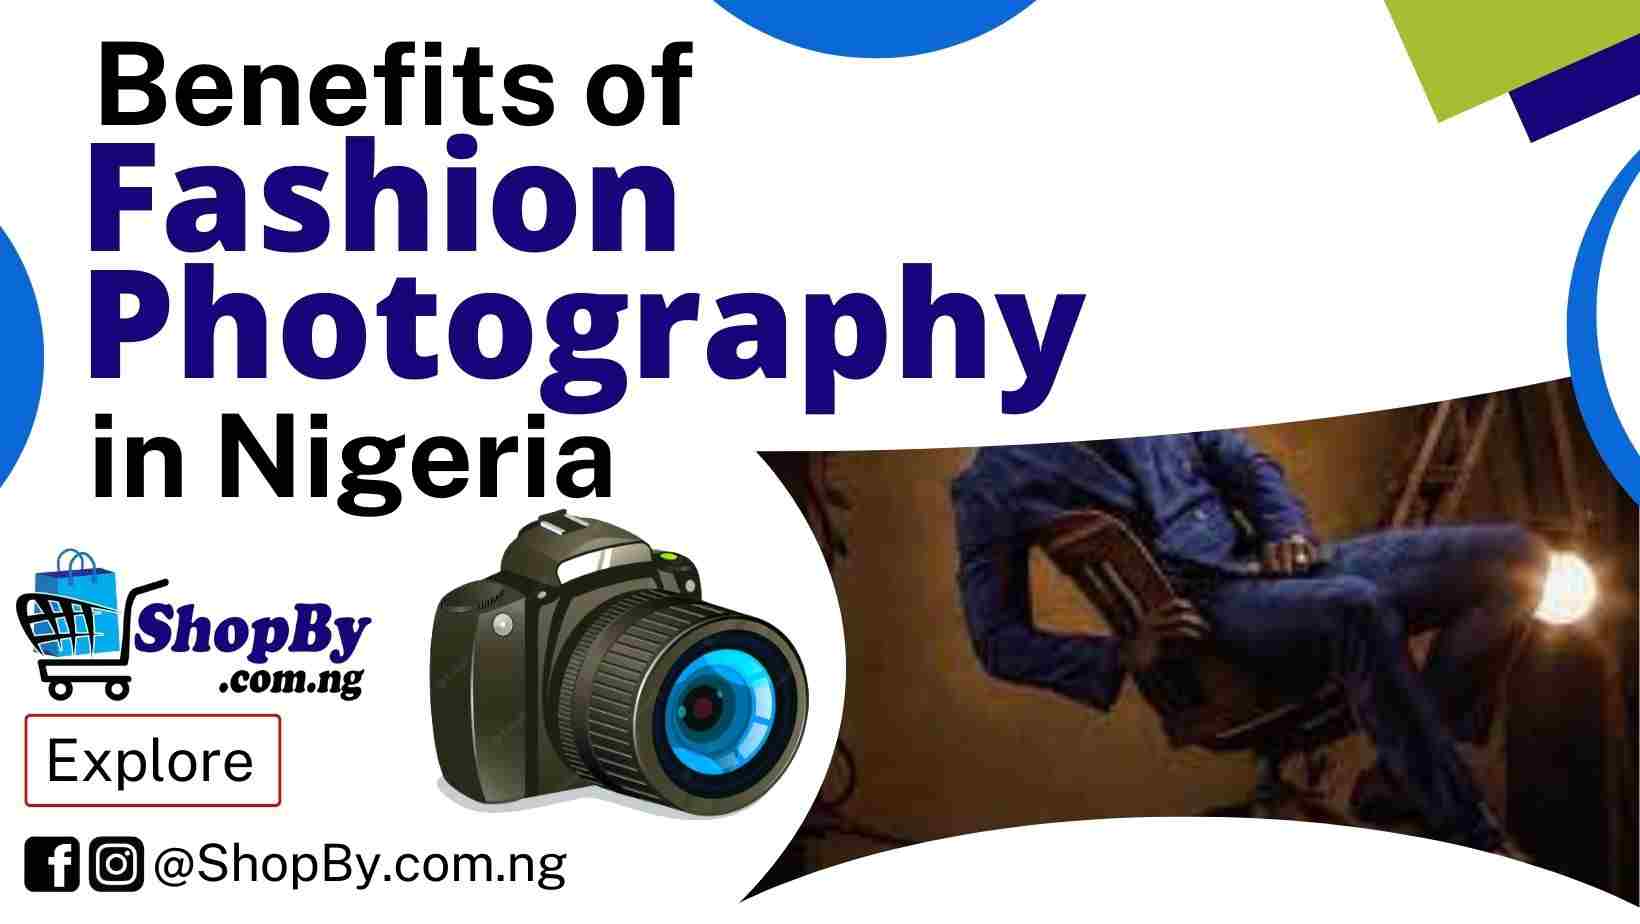 Benefits of Fashion Photography in Nigeria